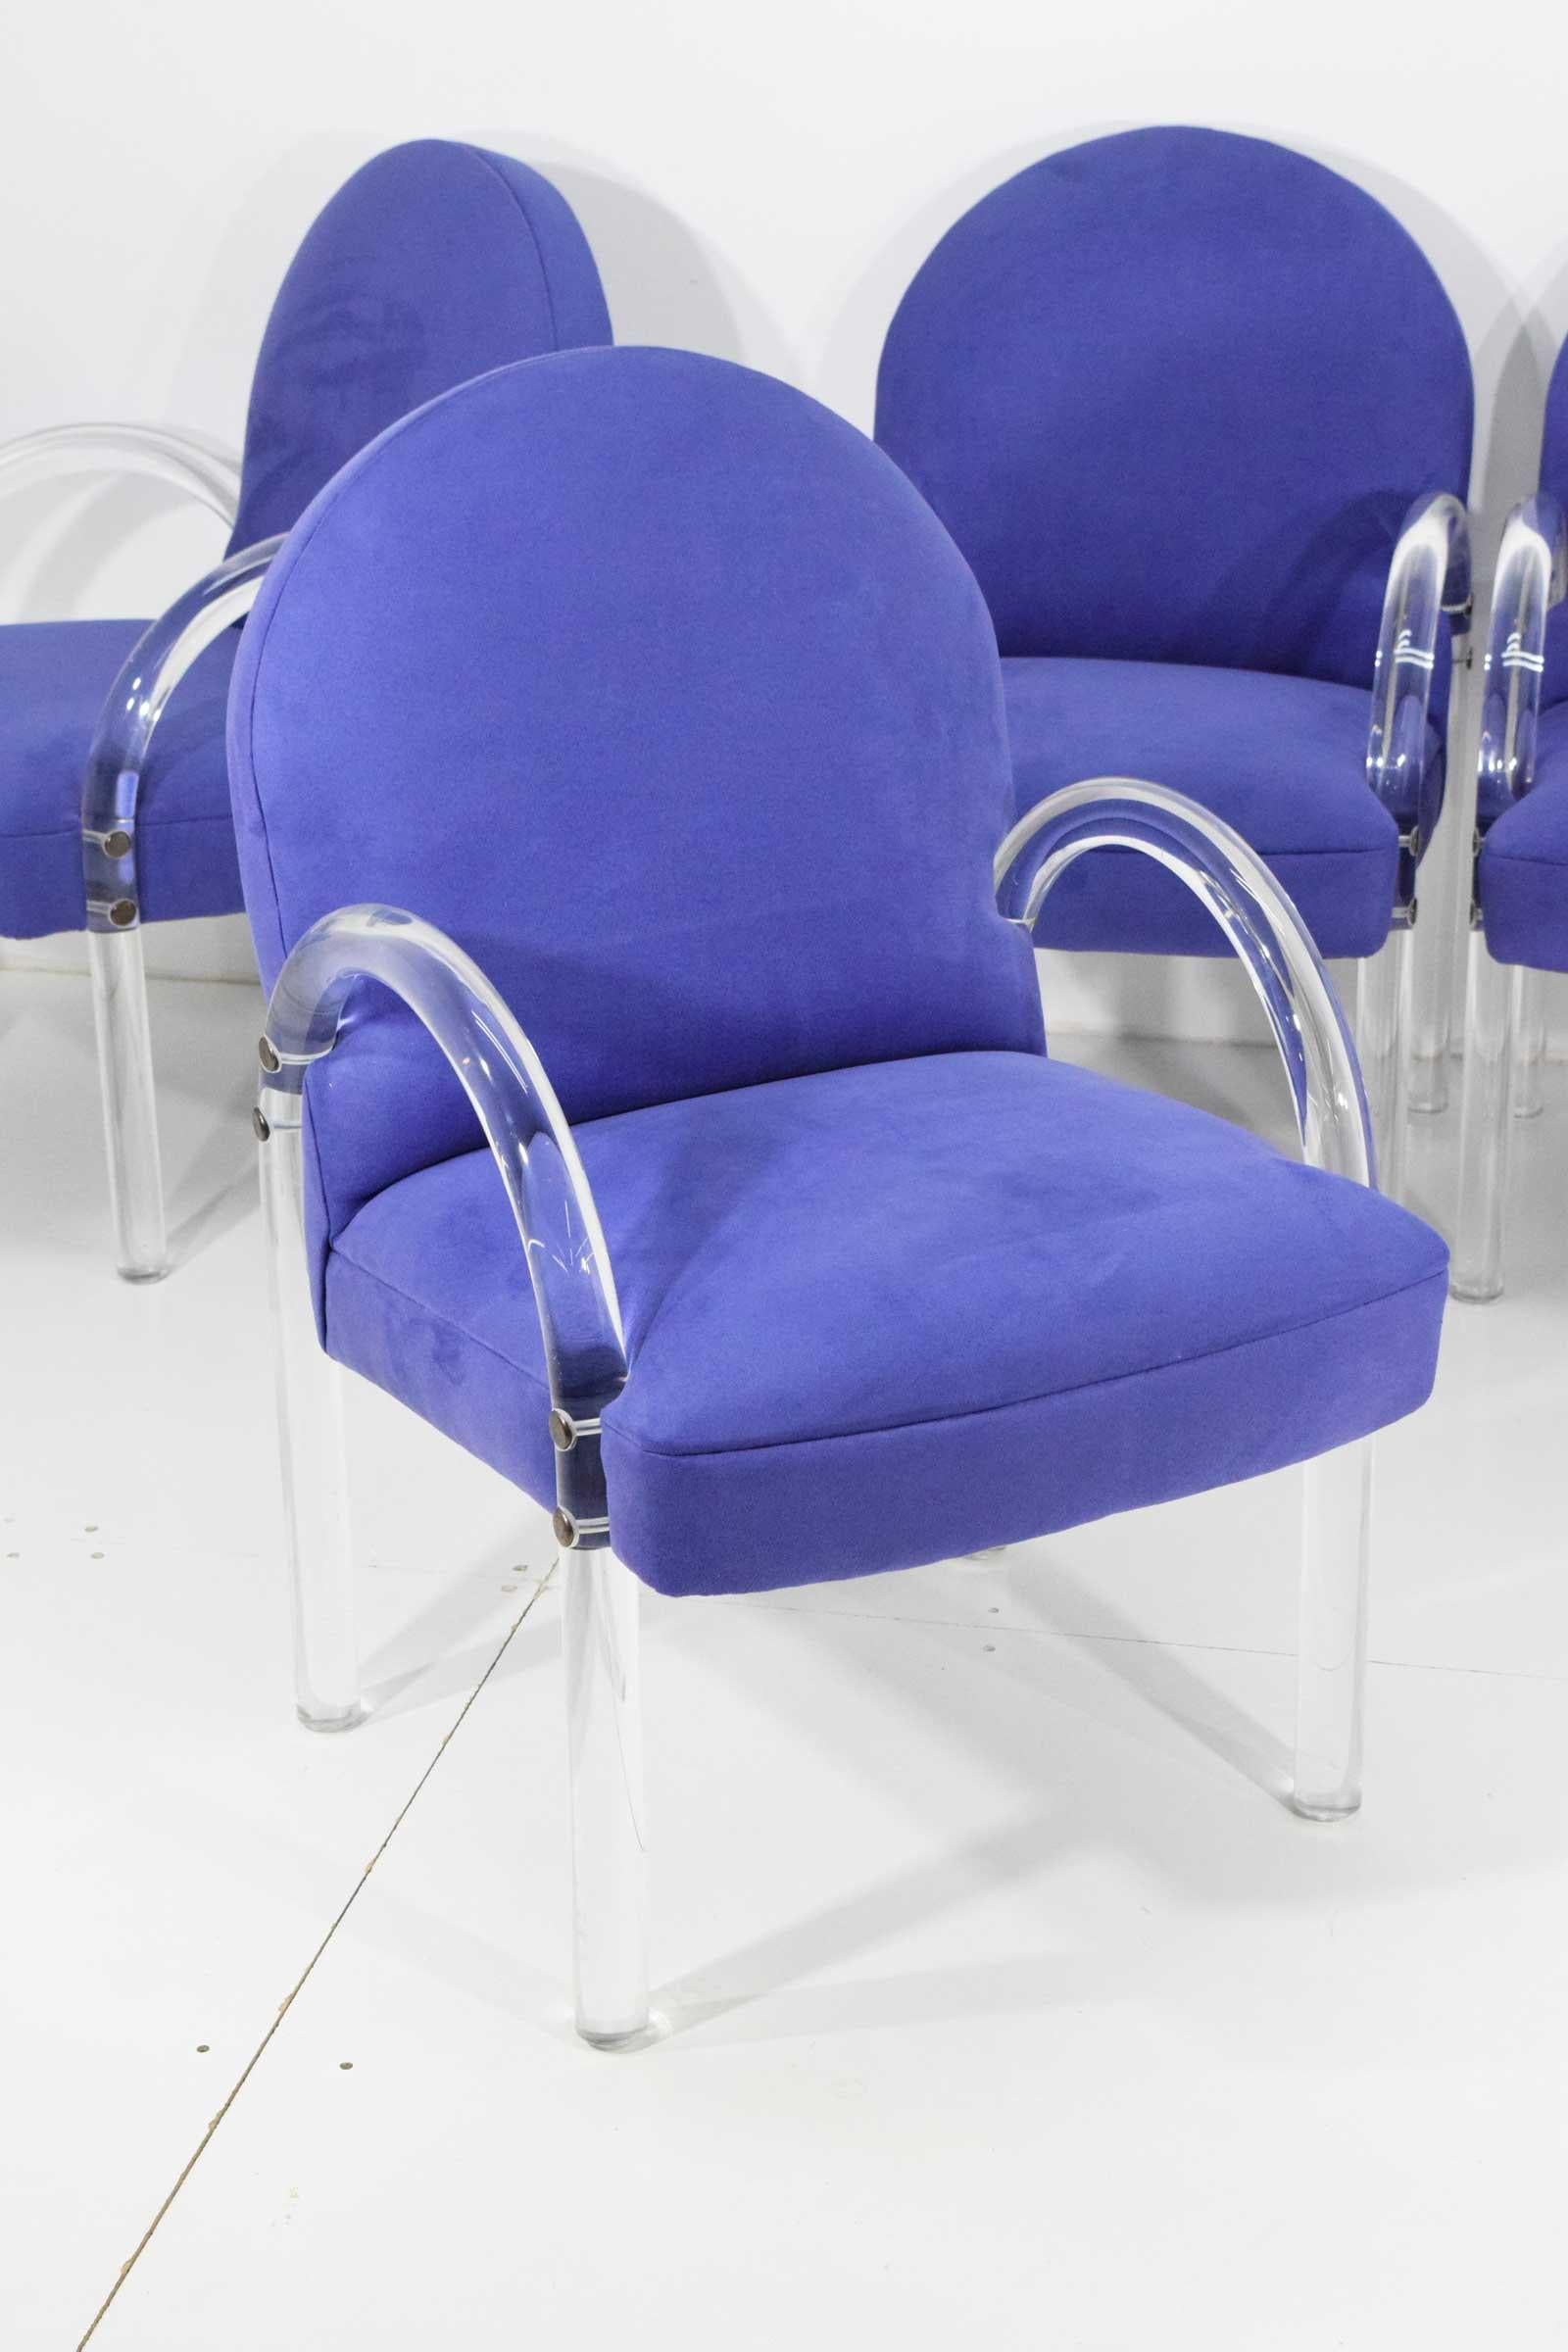 Chairs have curved Lucite arms and are upholstered in a rich lavender microfiber. Brass fittings. Upholstery is wonderful or you can change if you desire. Foam is great as well.

Sold in sets of two. 